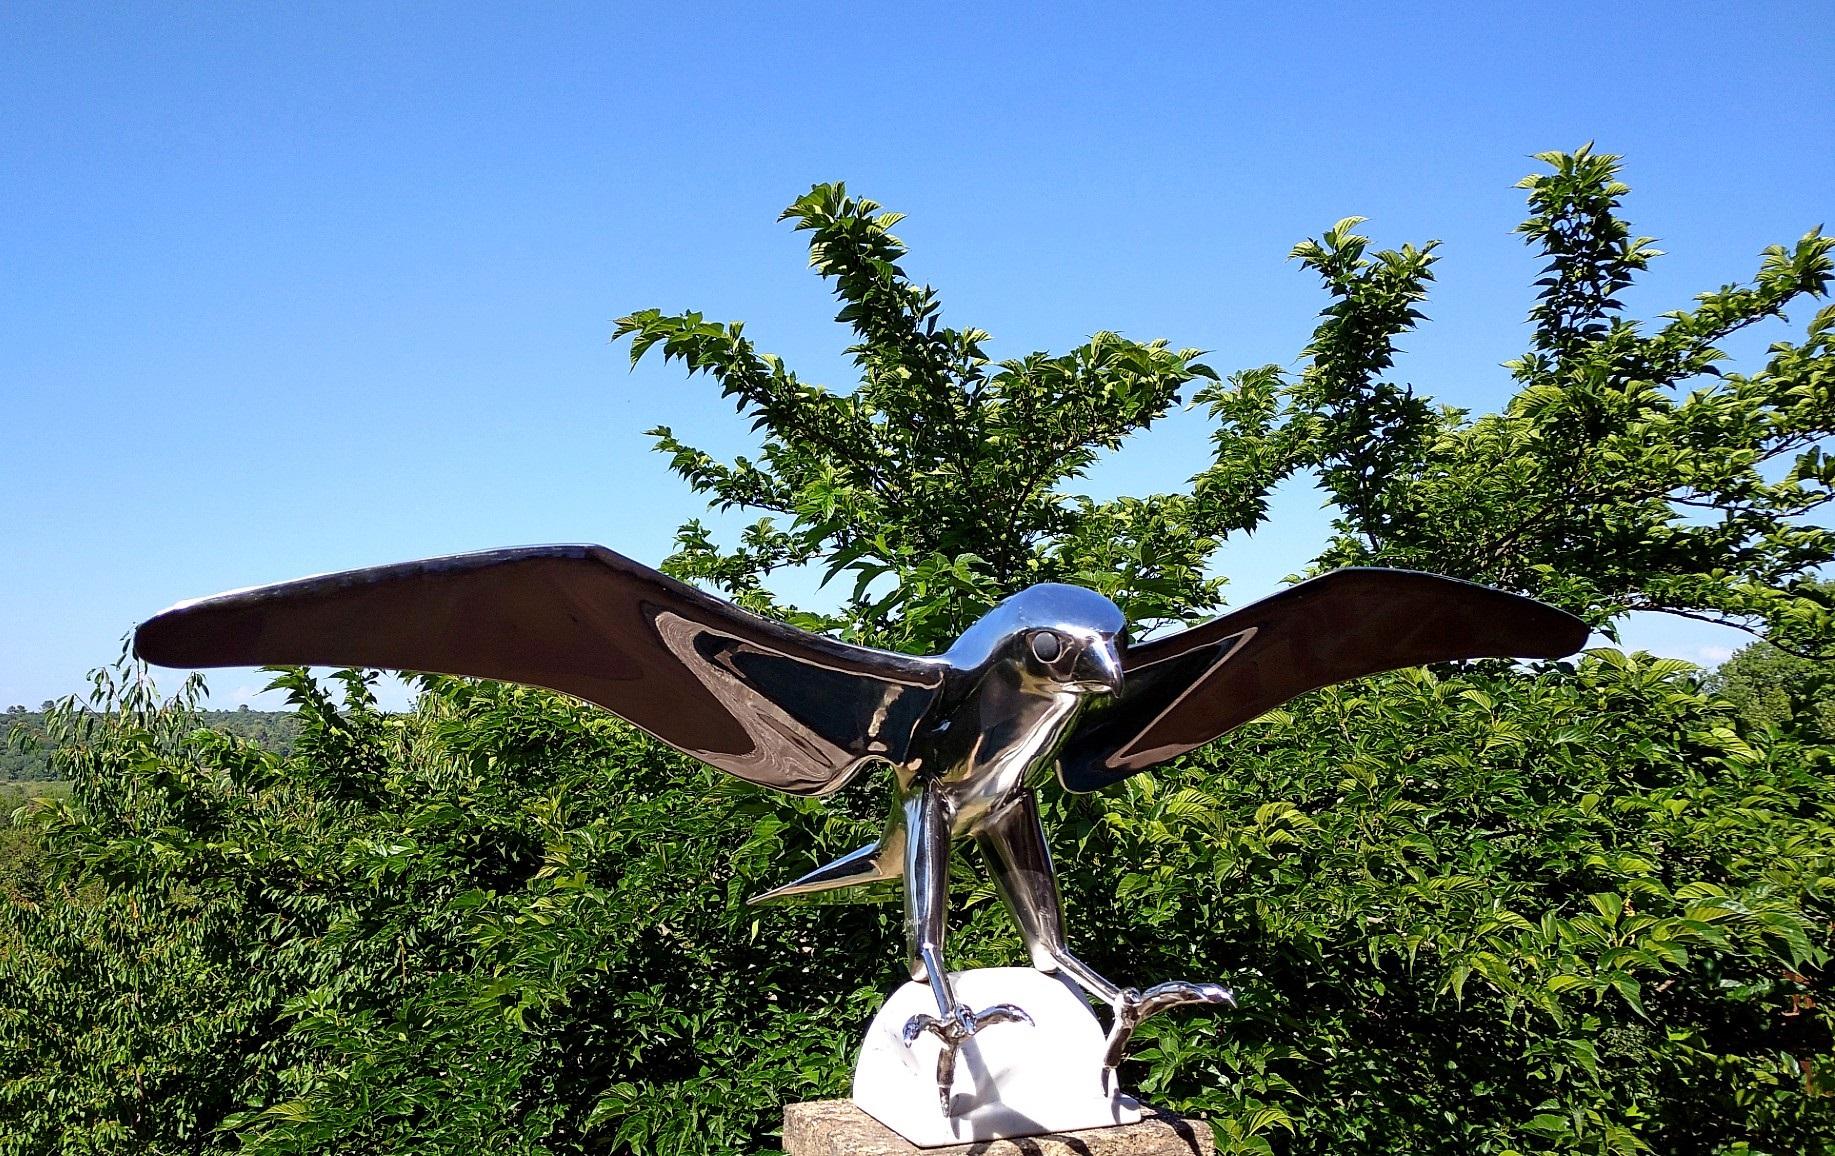 “Falcon”, Monumental Bird Figurative Stainless Steel Sculpture on Marble Base 12